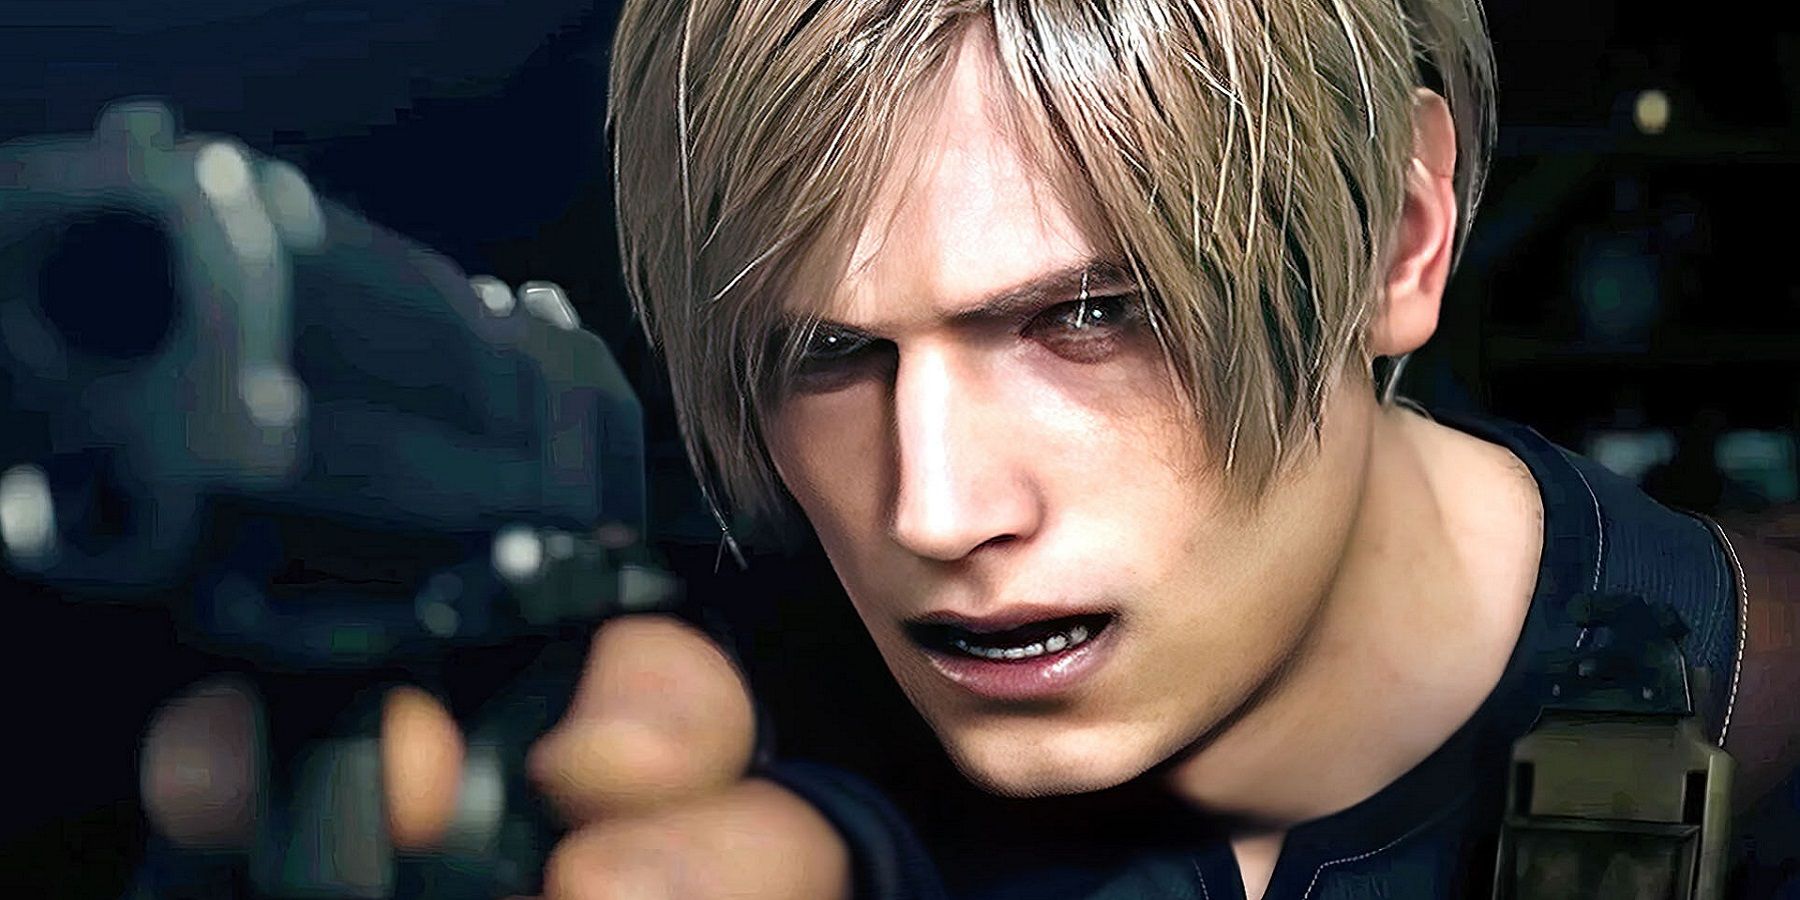 Image from the Resident Evil 4 remake showing a close-up of Leon Kennedy pointing a gun.